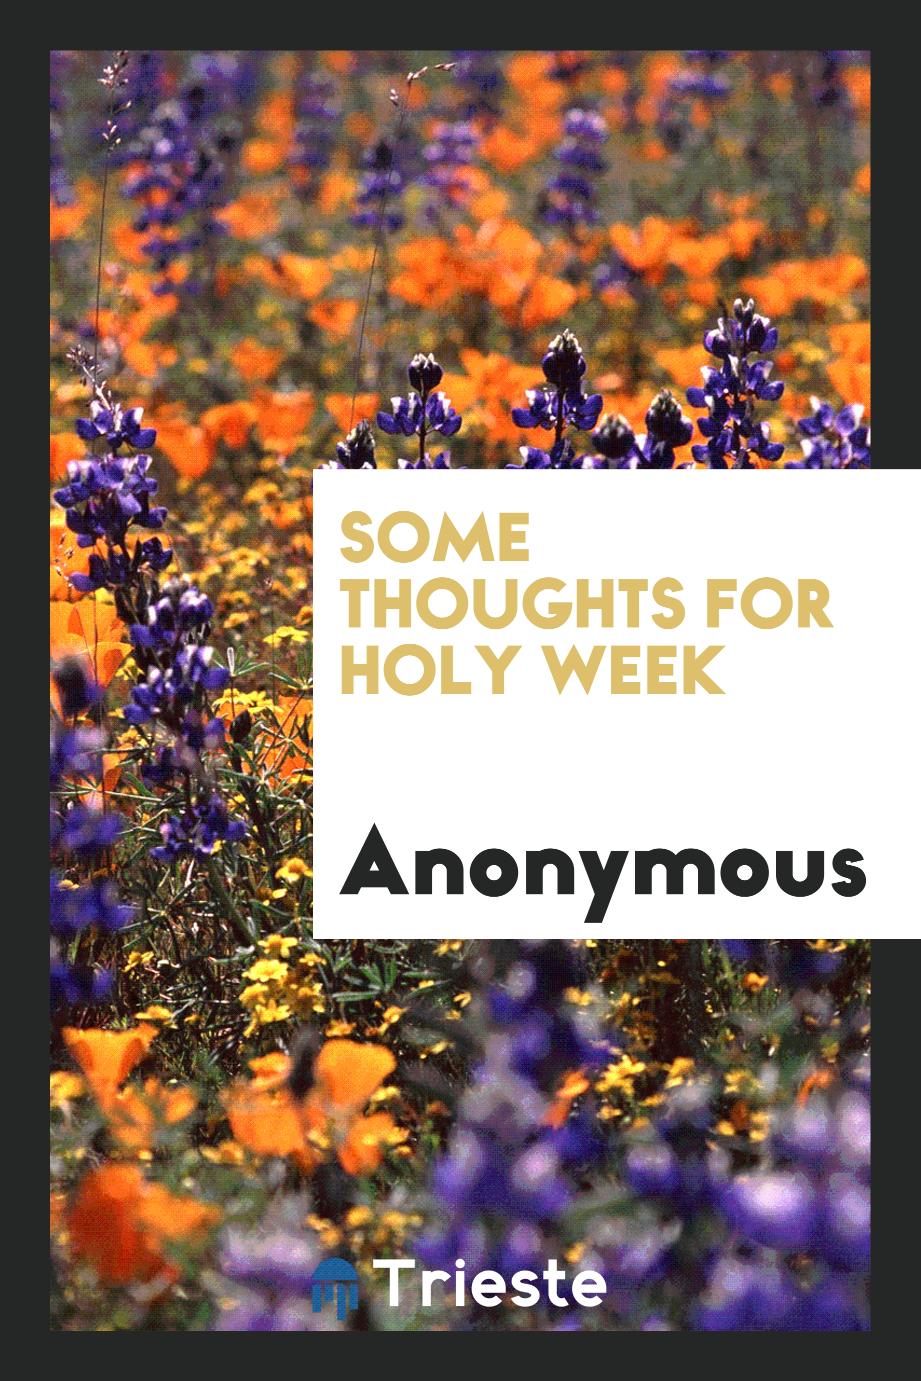 Some thoughts for Holy week